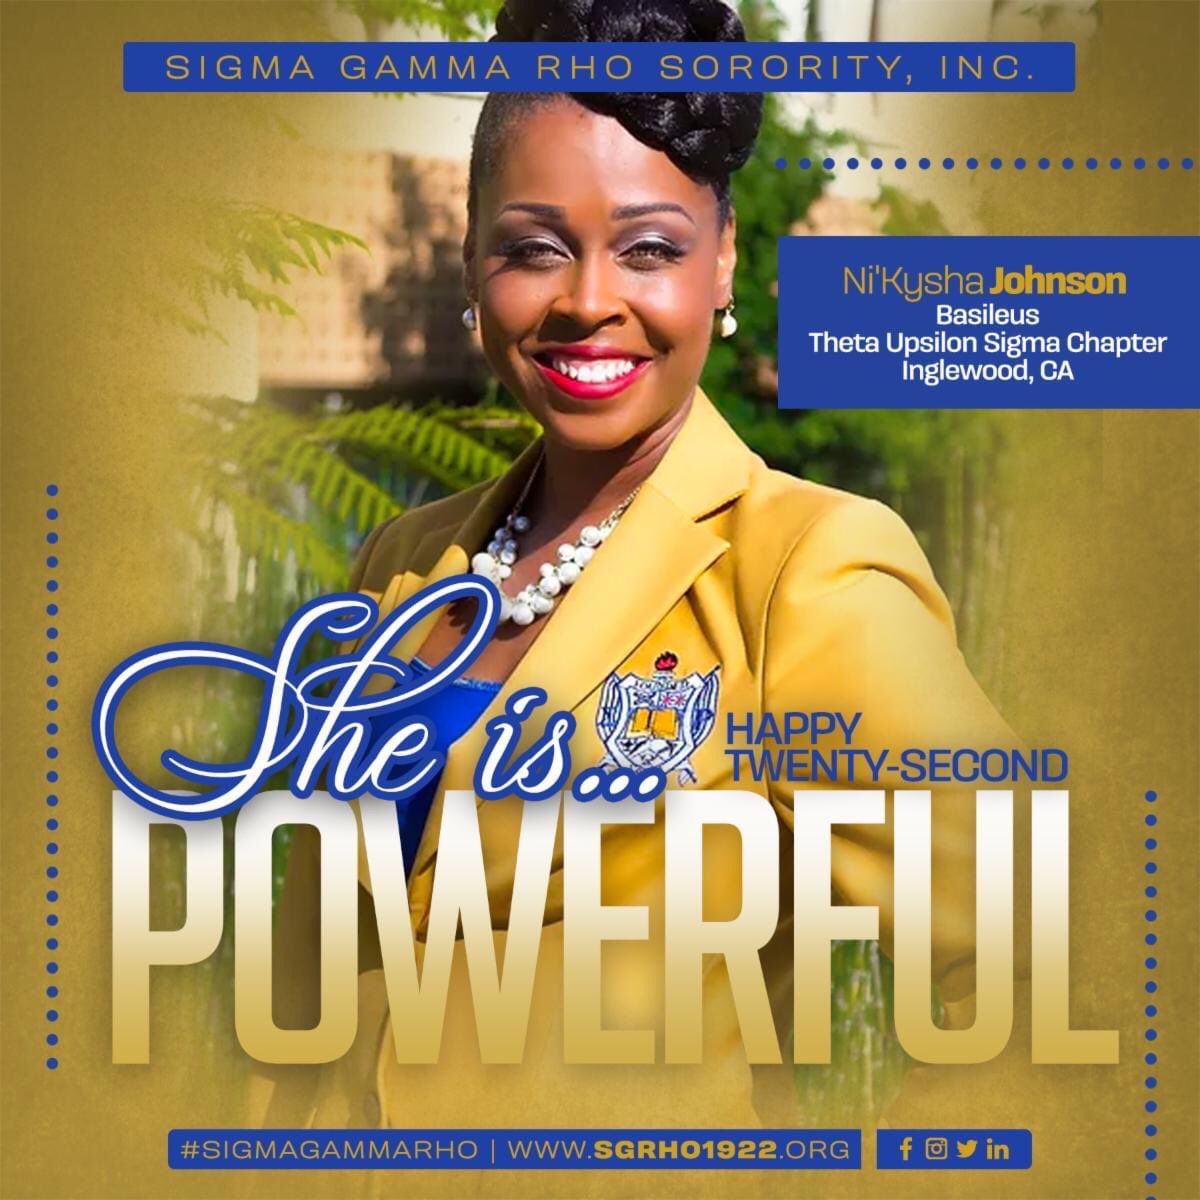 Attract what you expect,
Reflect what you desire,
Become what you respect,
Mirror what you admire.

SHE IS POWERFUL!
SHE IS A SIGMA GAMMA RHO!
#SigmaGammaRho #SGRho #Greater #RhoadToCentennial #SheIsPowerful